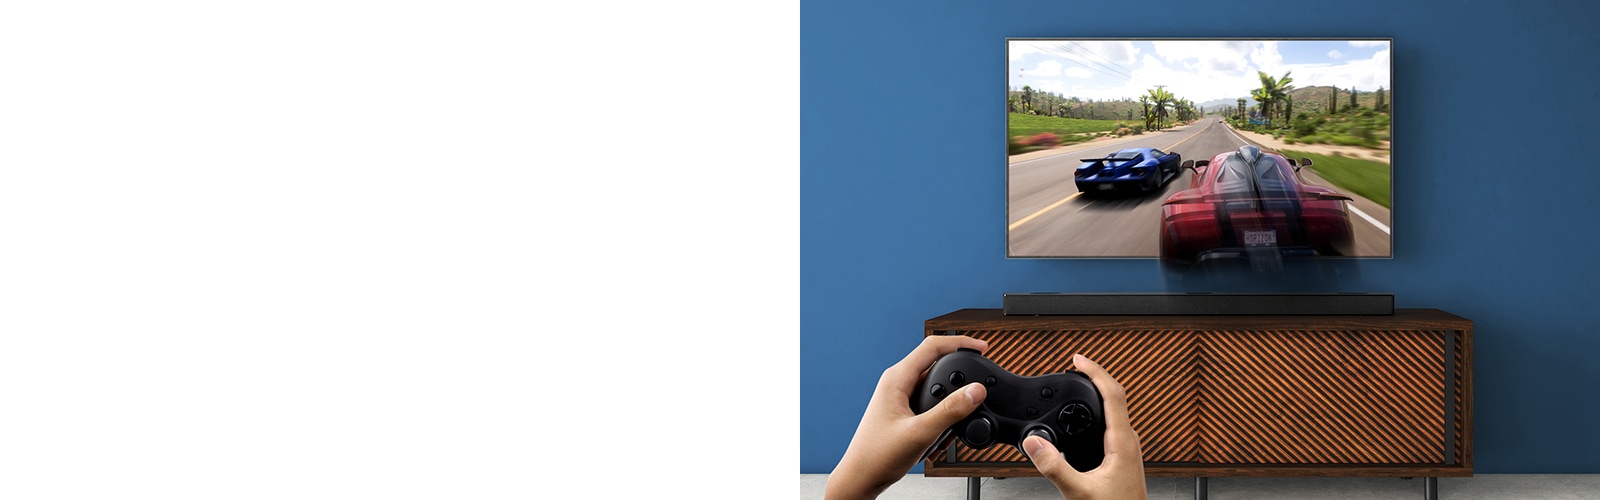 LG TV is on the wall, showing a racing game. LG Sound Bar is place on the brown shelf, right below LG TV. A man is holding a joy stick.